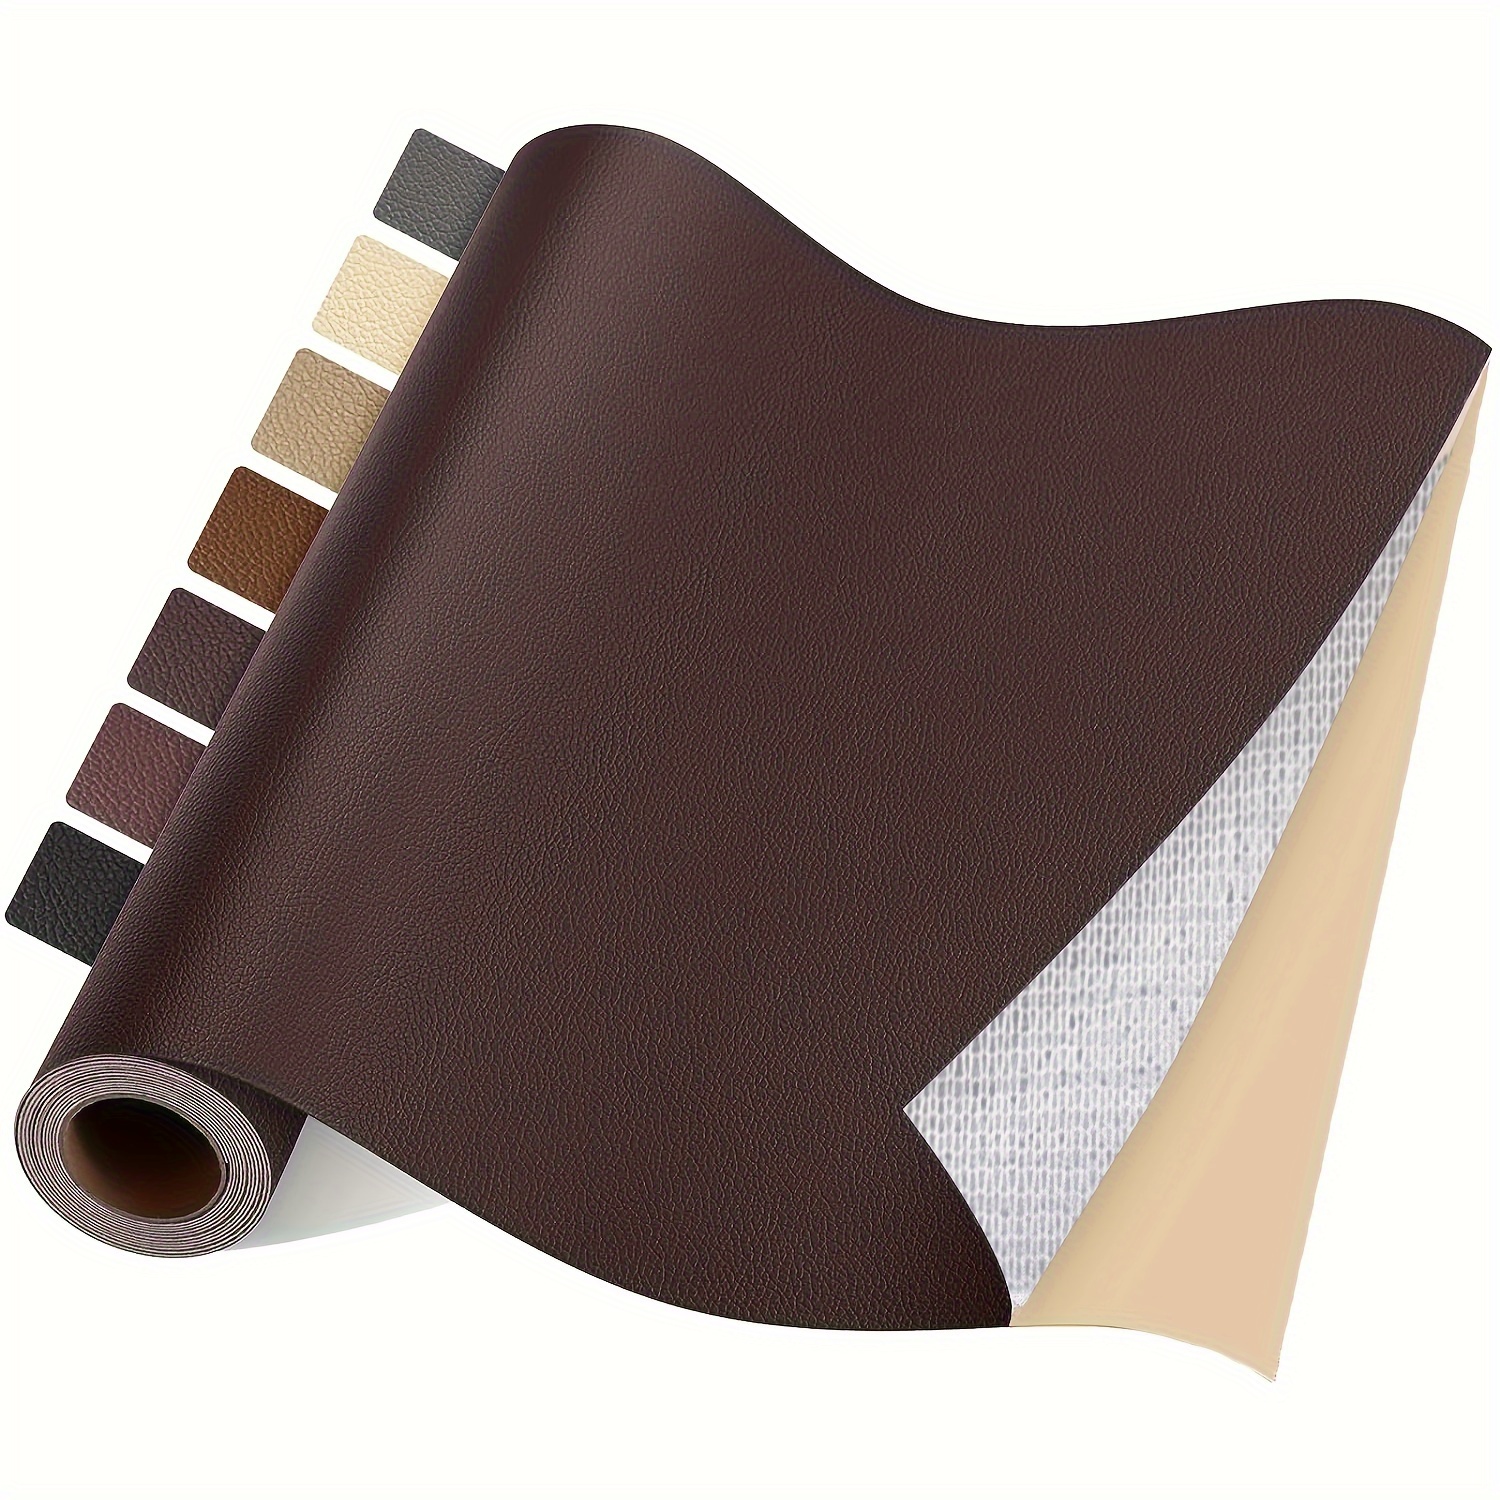  Leather Repair Tape, Self-Adhesive Leather Refinisher Cuttable  Sofa Repair Patch 54X19.6inch Sofa Repair Leather Seat Patch Sticker  Adhesive Backed Leather (Color : 6# Light Brown)